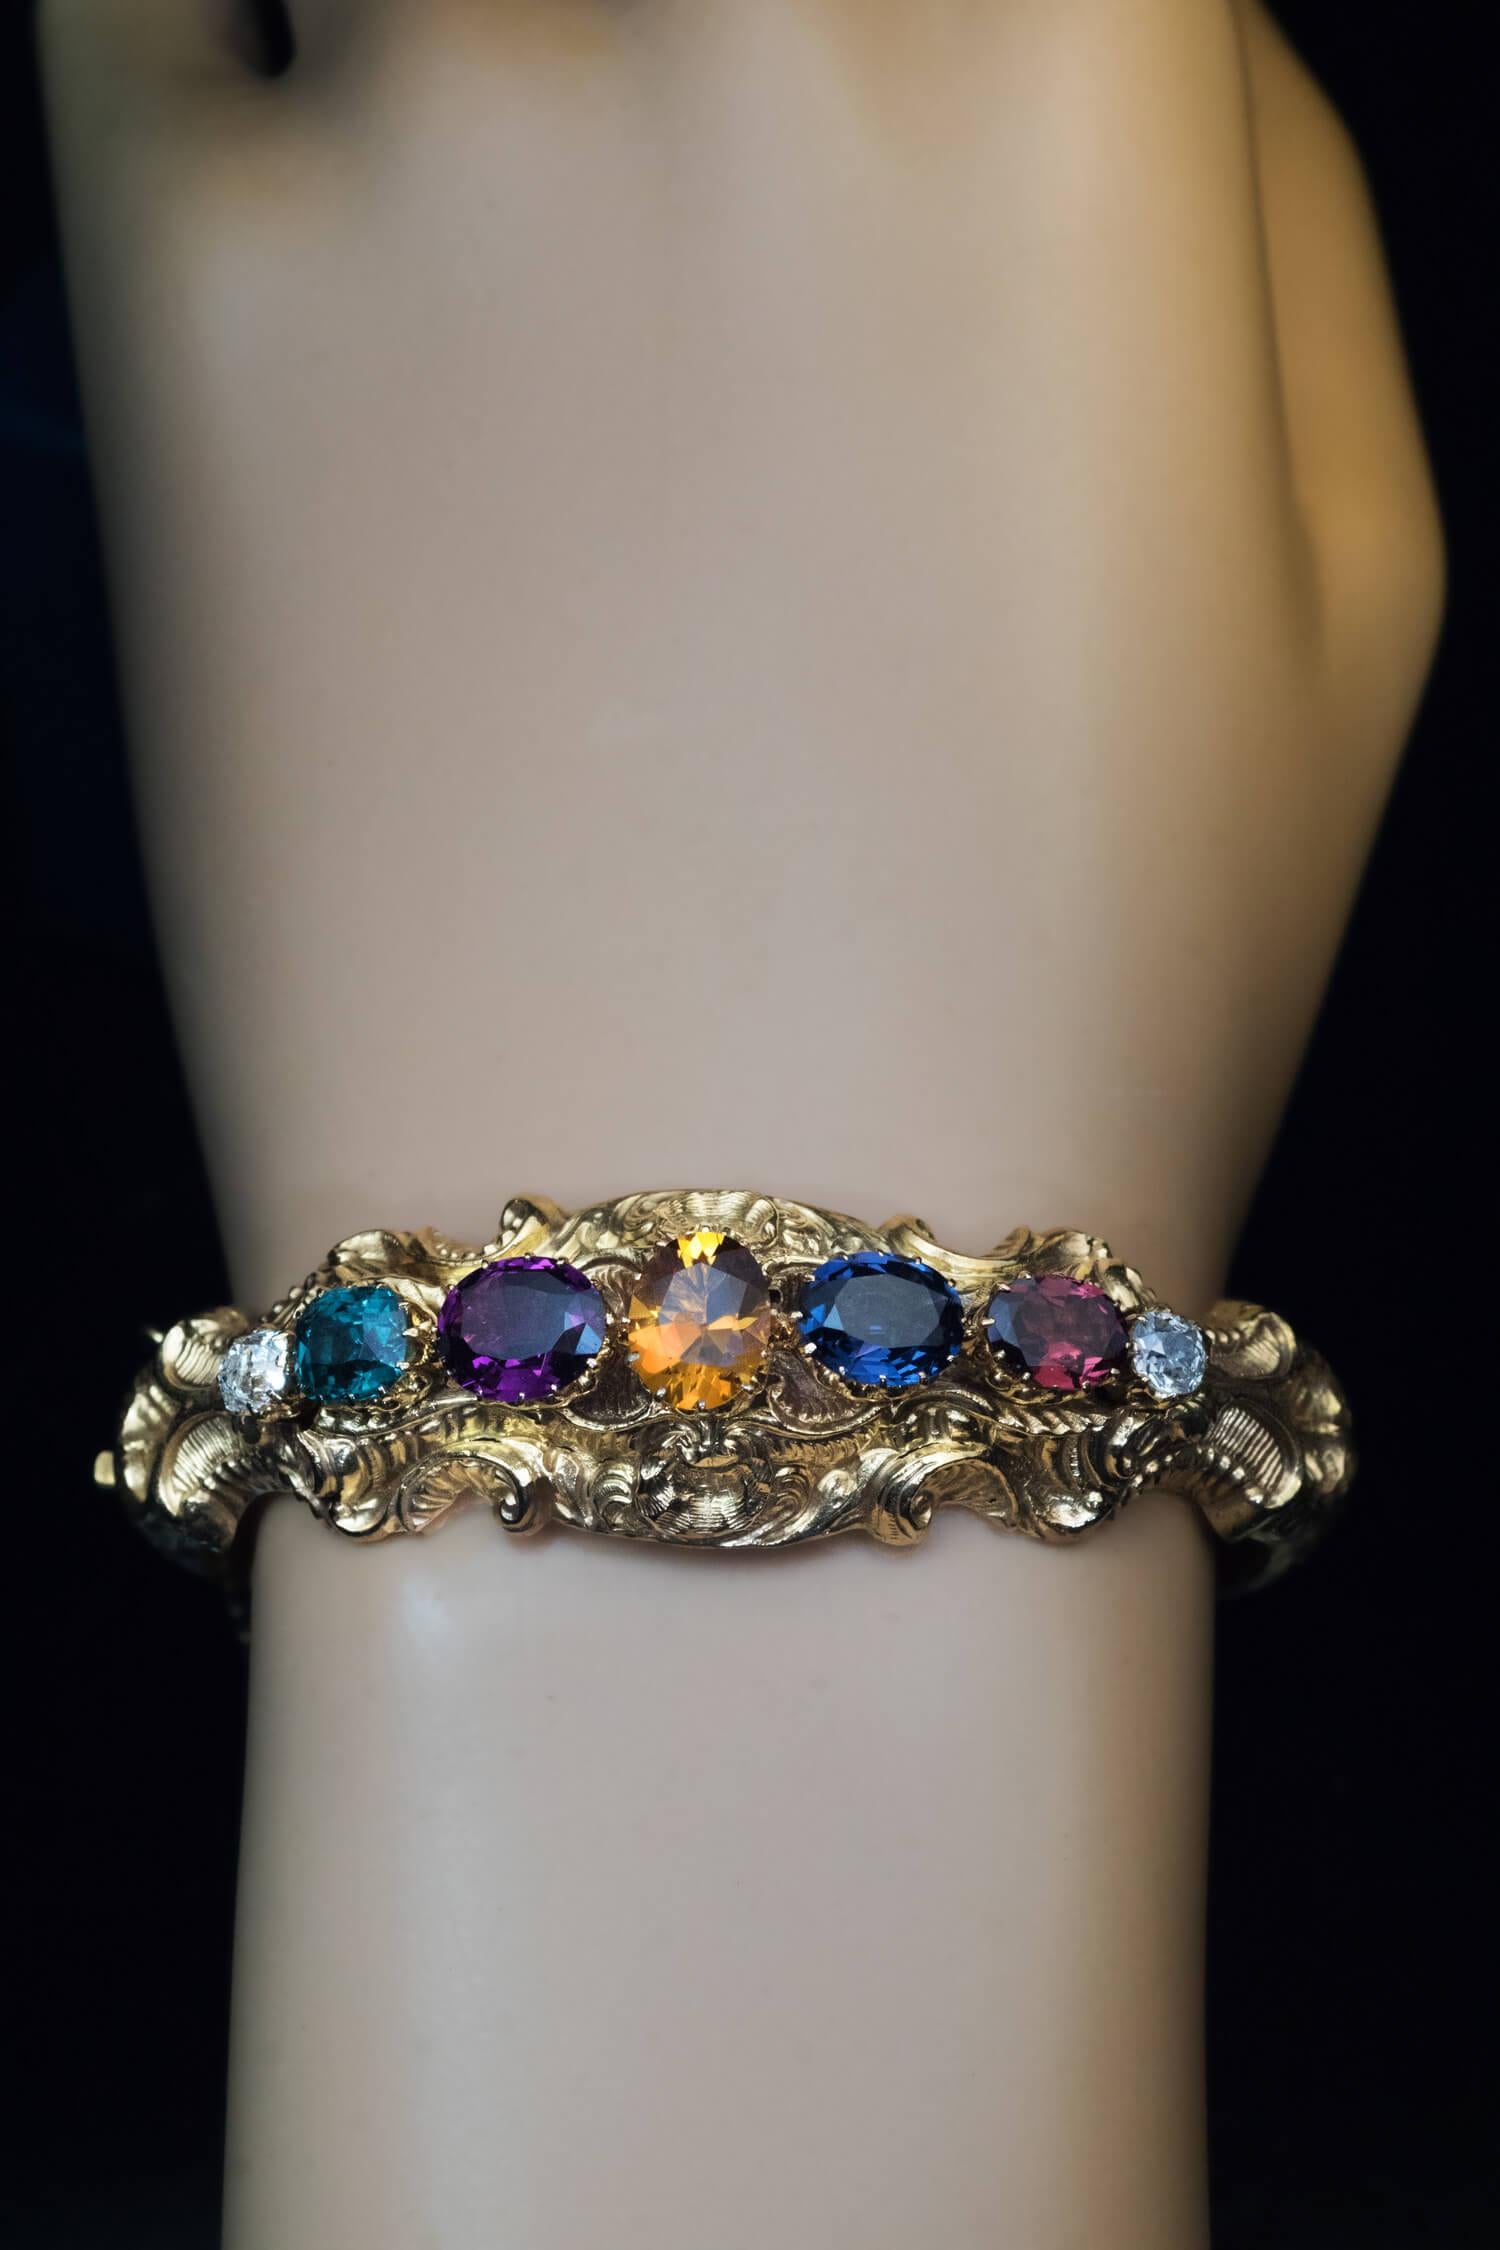 Circa 1850  The hollow 14K yellow gold bangle bracelet is embossed with Rococo style scrolls, foliage and shells. The bracelet is set with two bright white (E color) old mine cut diamonds (approximately 0.60 ct total), a blue spinel, a purple